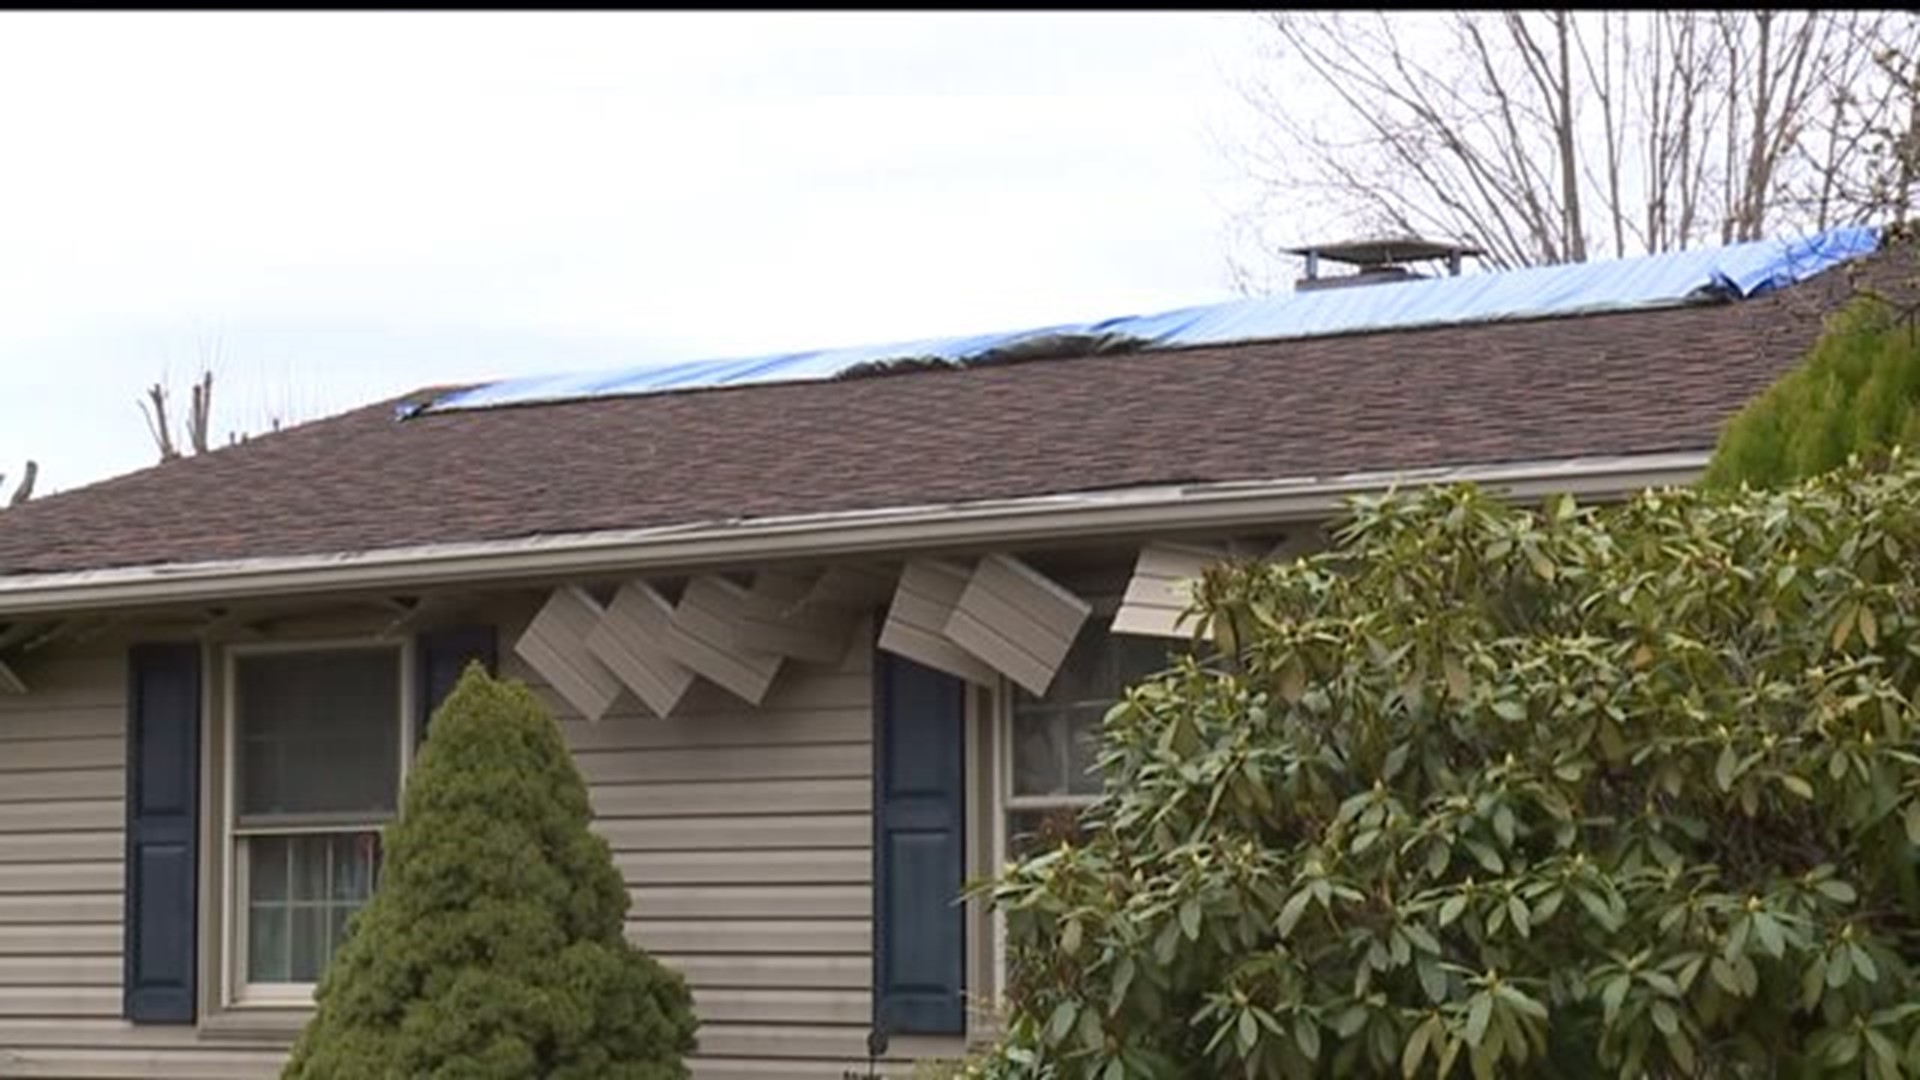 Neighbors in York Co. concerned over more severe weather coming through area